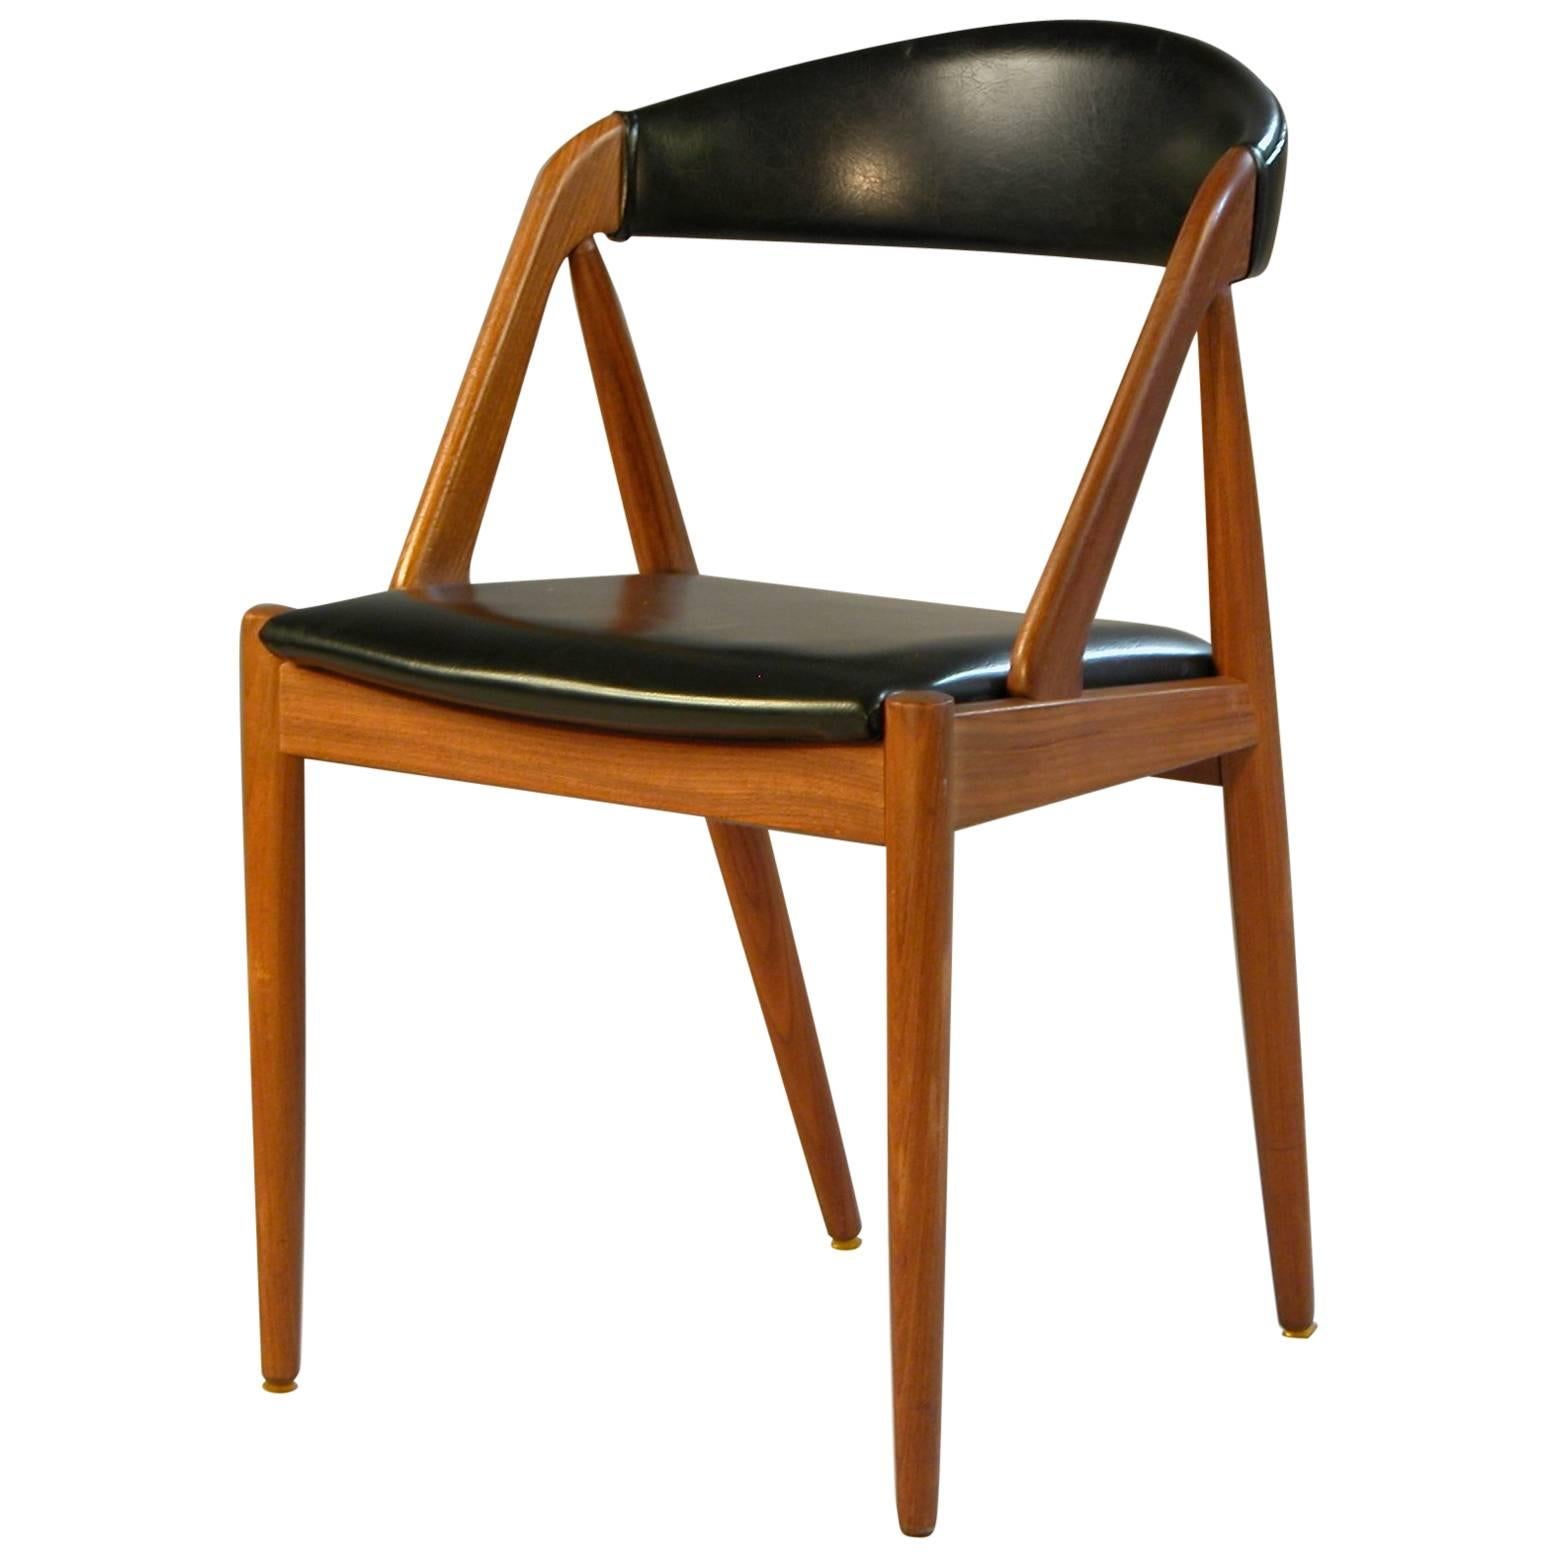 1960s Kai Kristiansen Model 31 Dining chairs in Teak and Black Leatherette